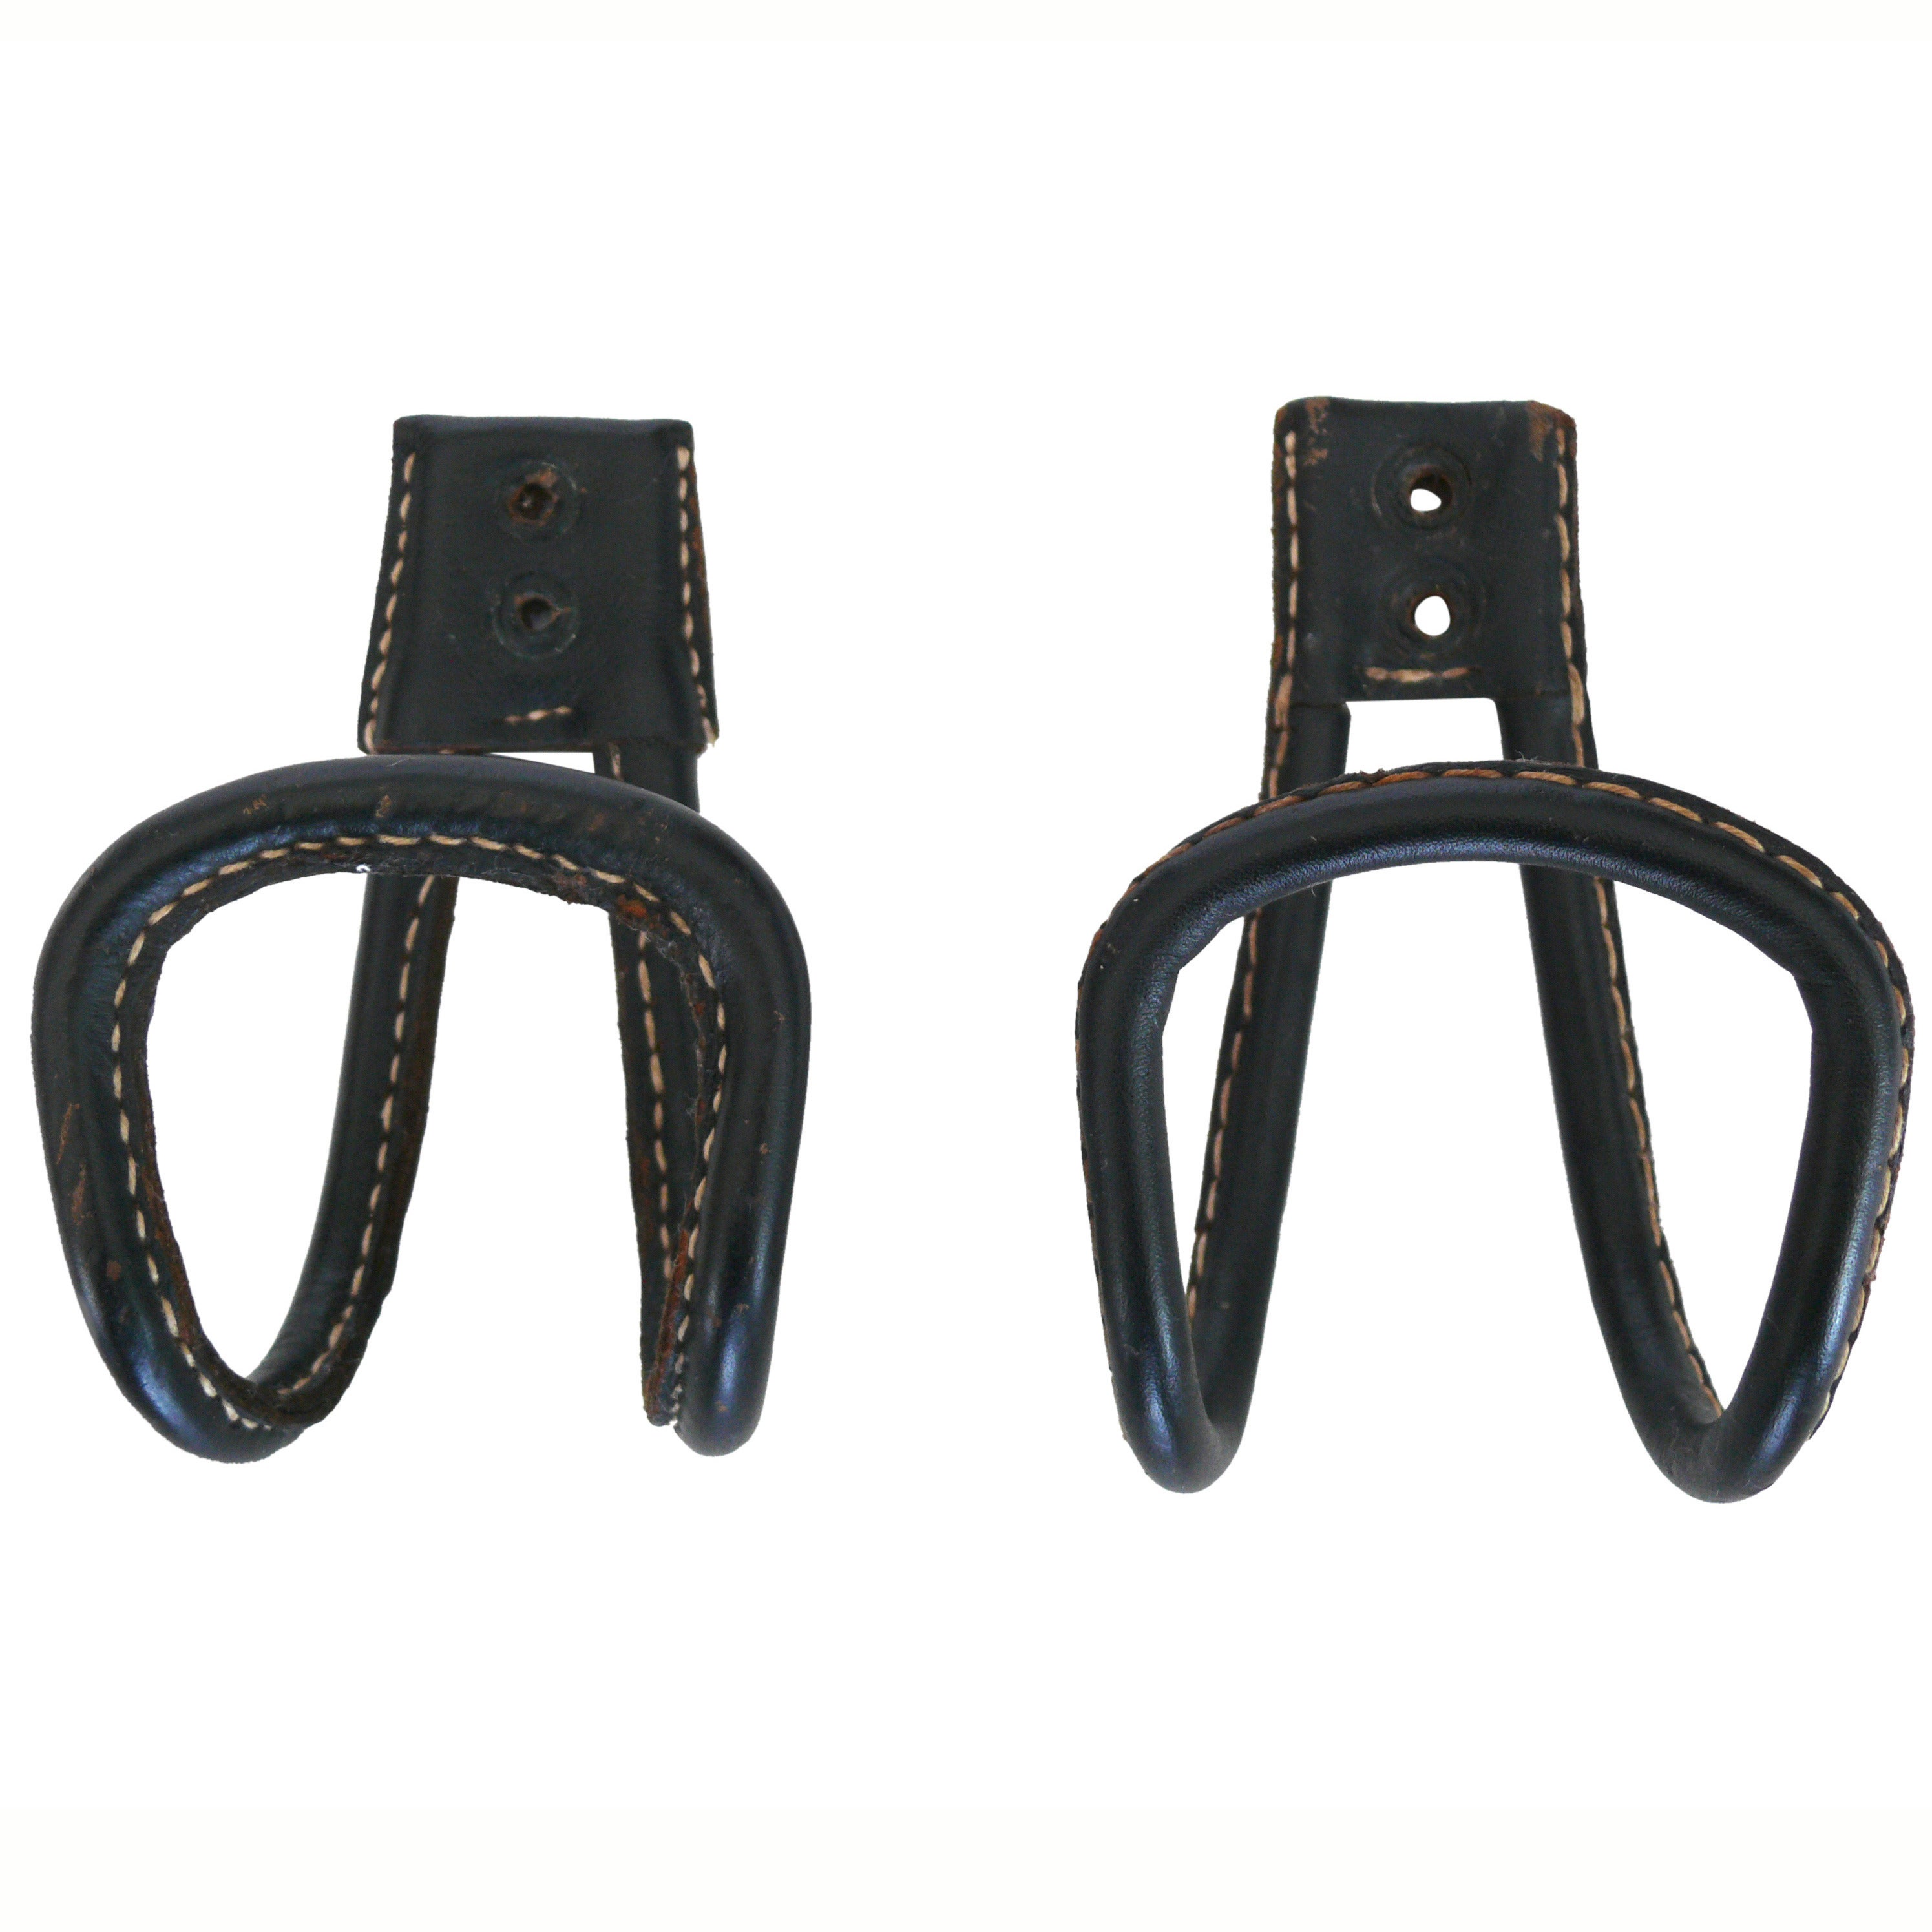 Jacques Adnet Leather Hooks